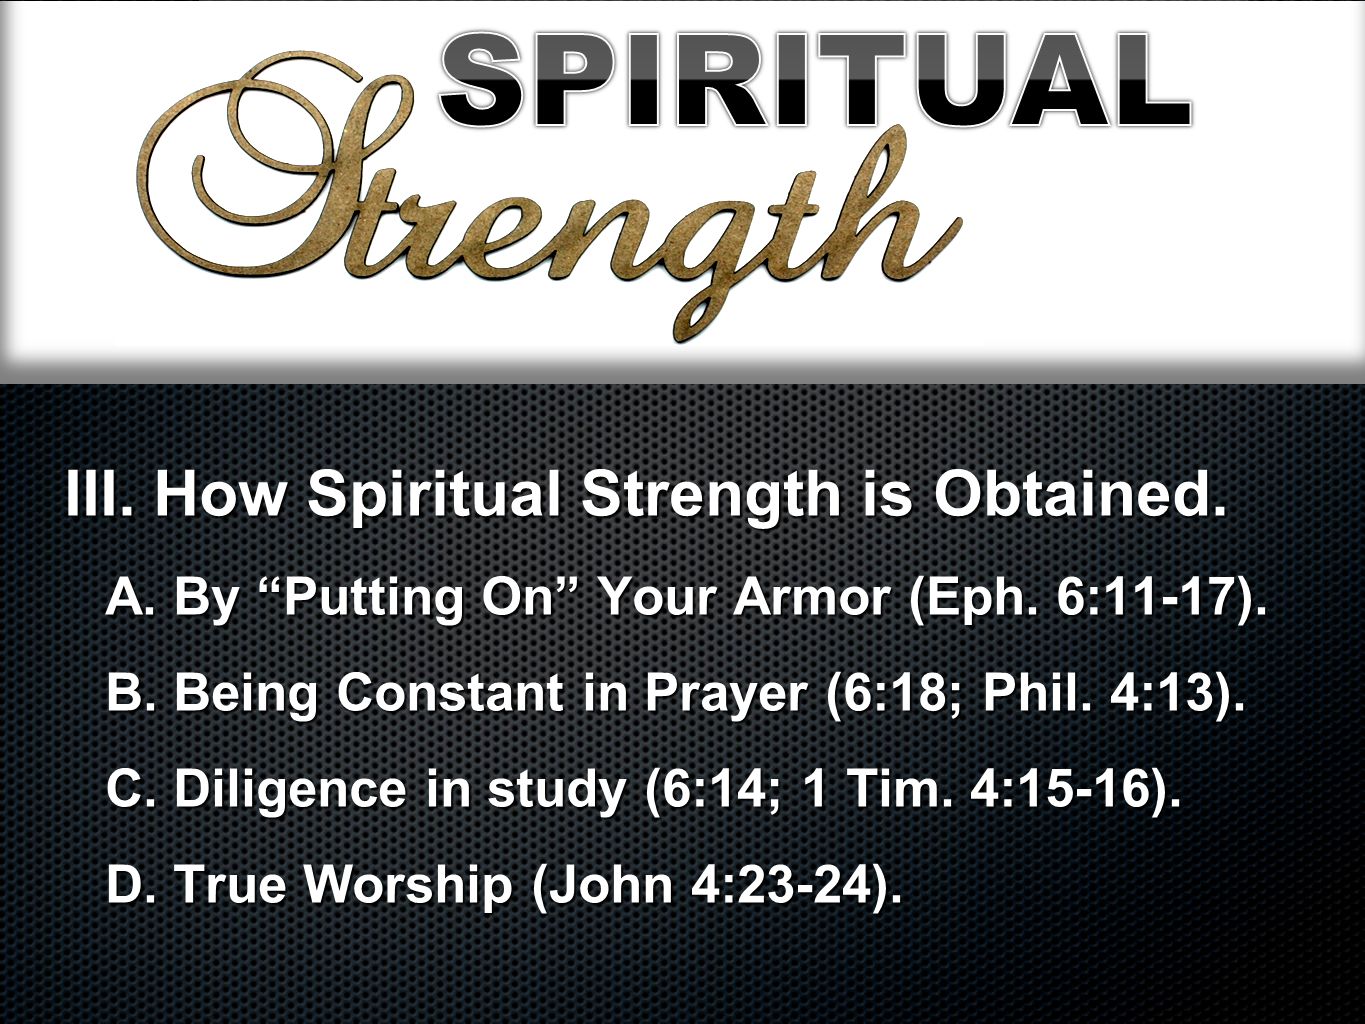 III. How Spiritual Strength is Obtained. A. By Putting On Your Armor (Eph.